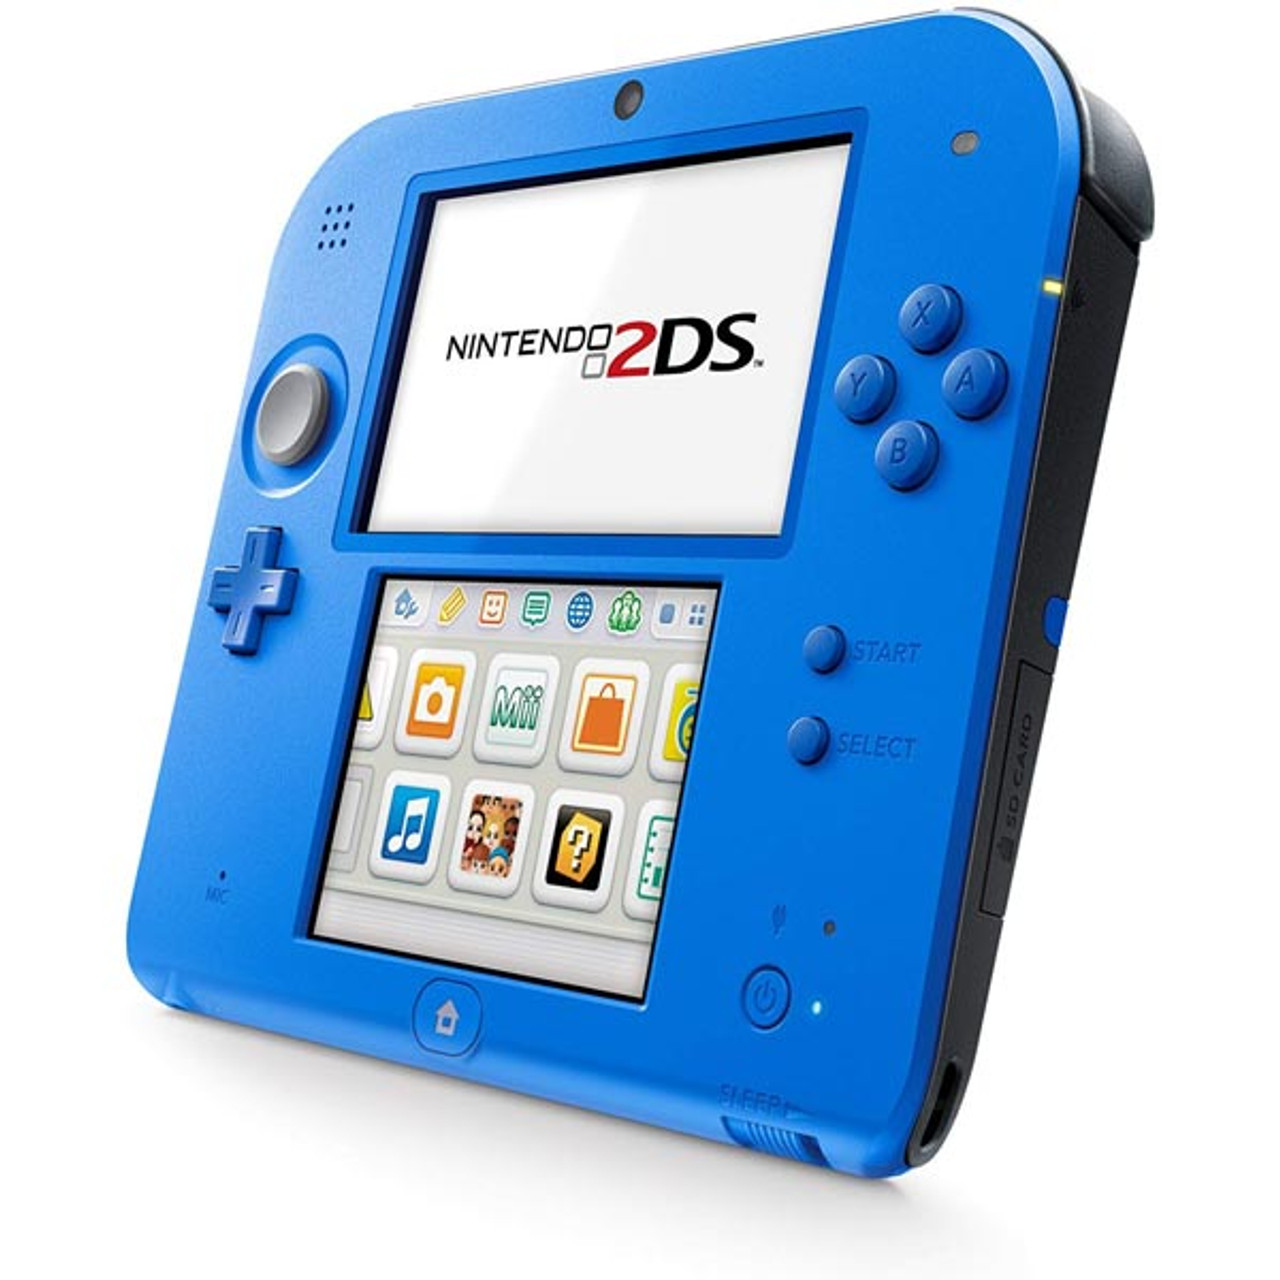 Nintendo 2DS Electric Handheld System w/ Charger For |